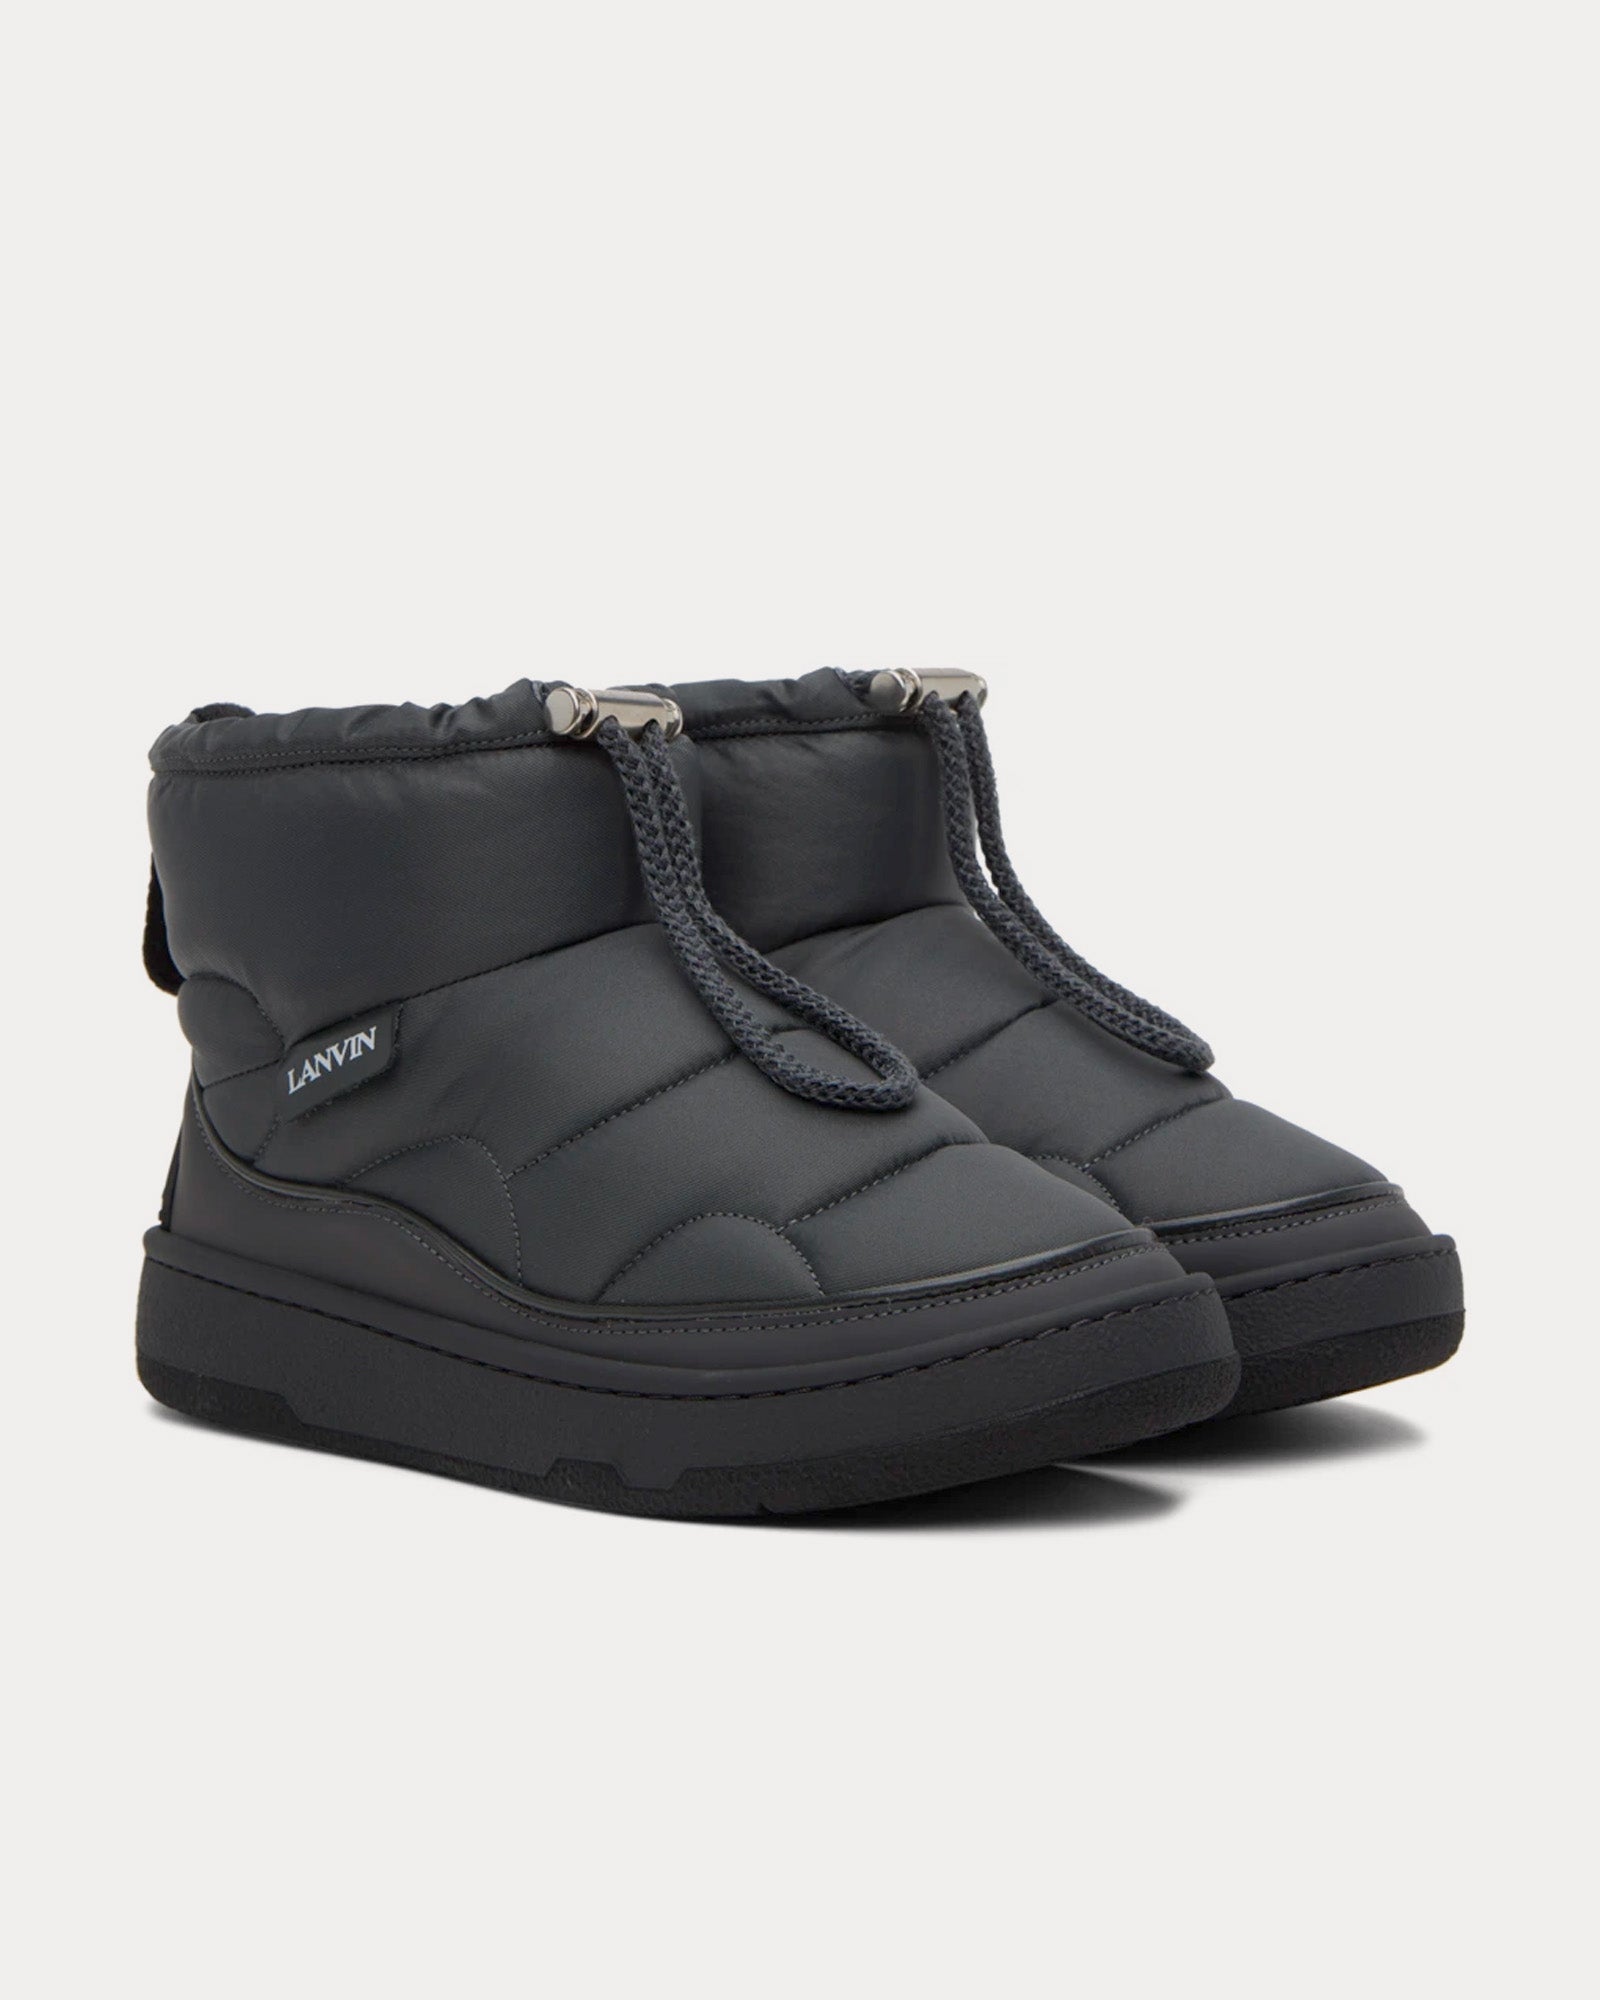 Lanvin - Curb Snow Ankle Nylon Loden Boots